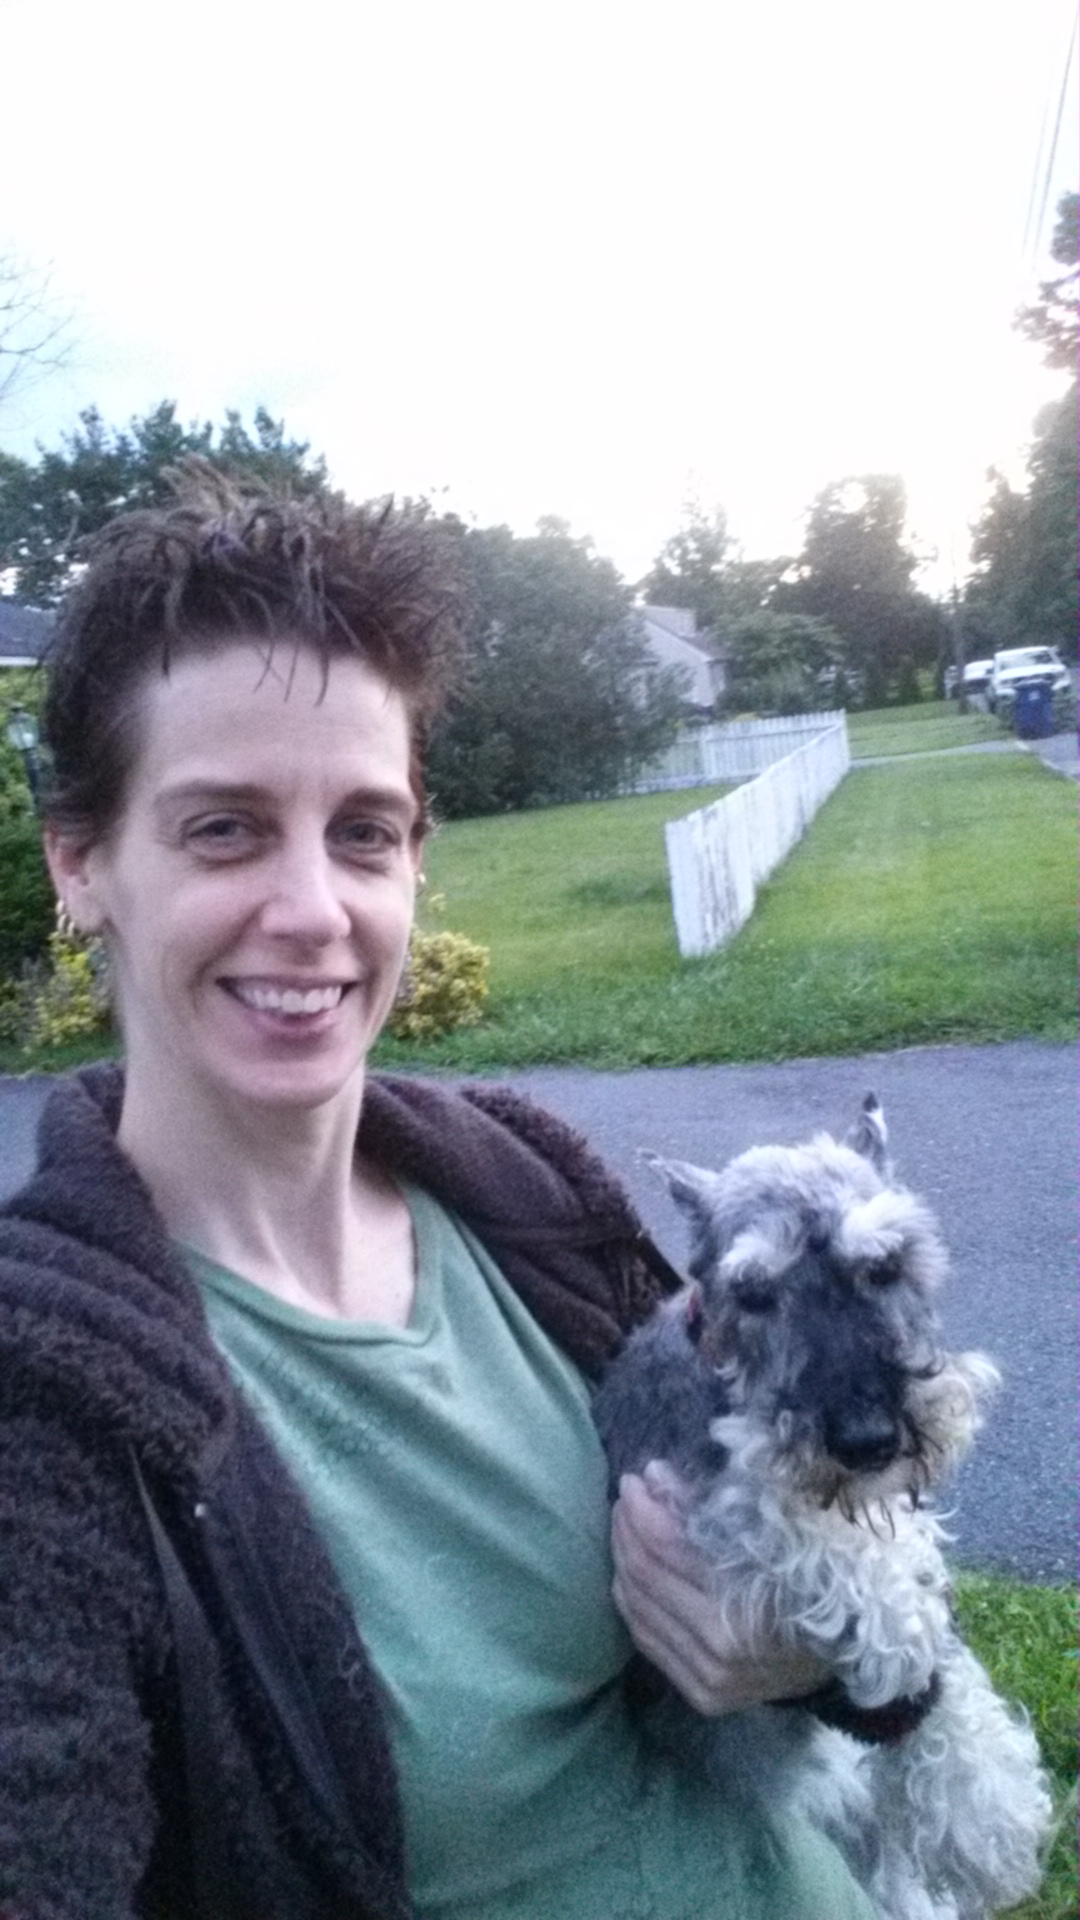 Me and one of my Schnauzers.